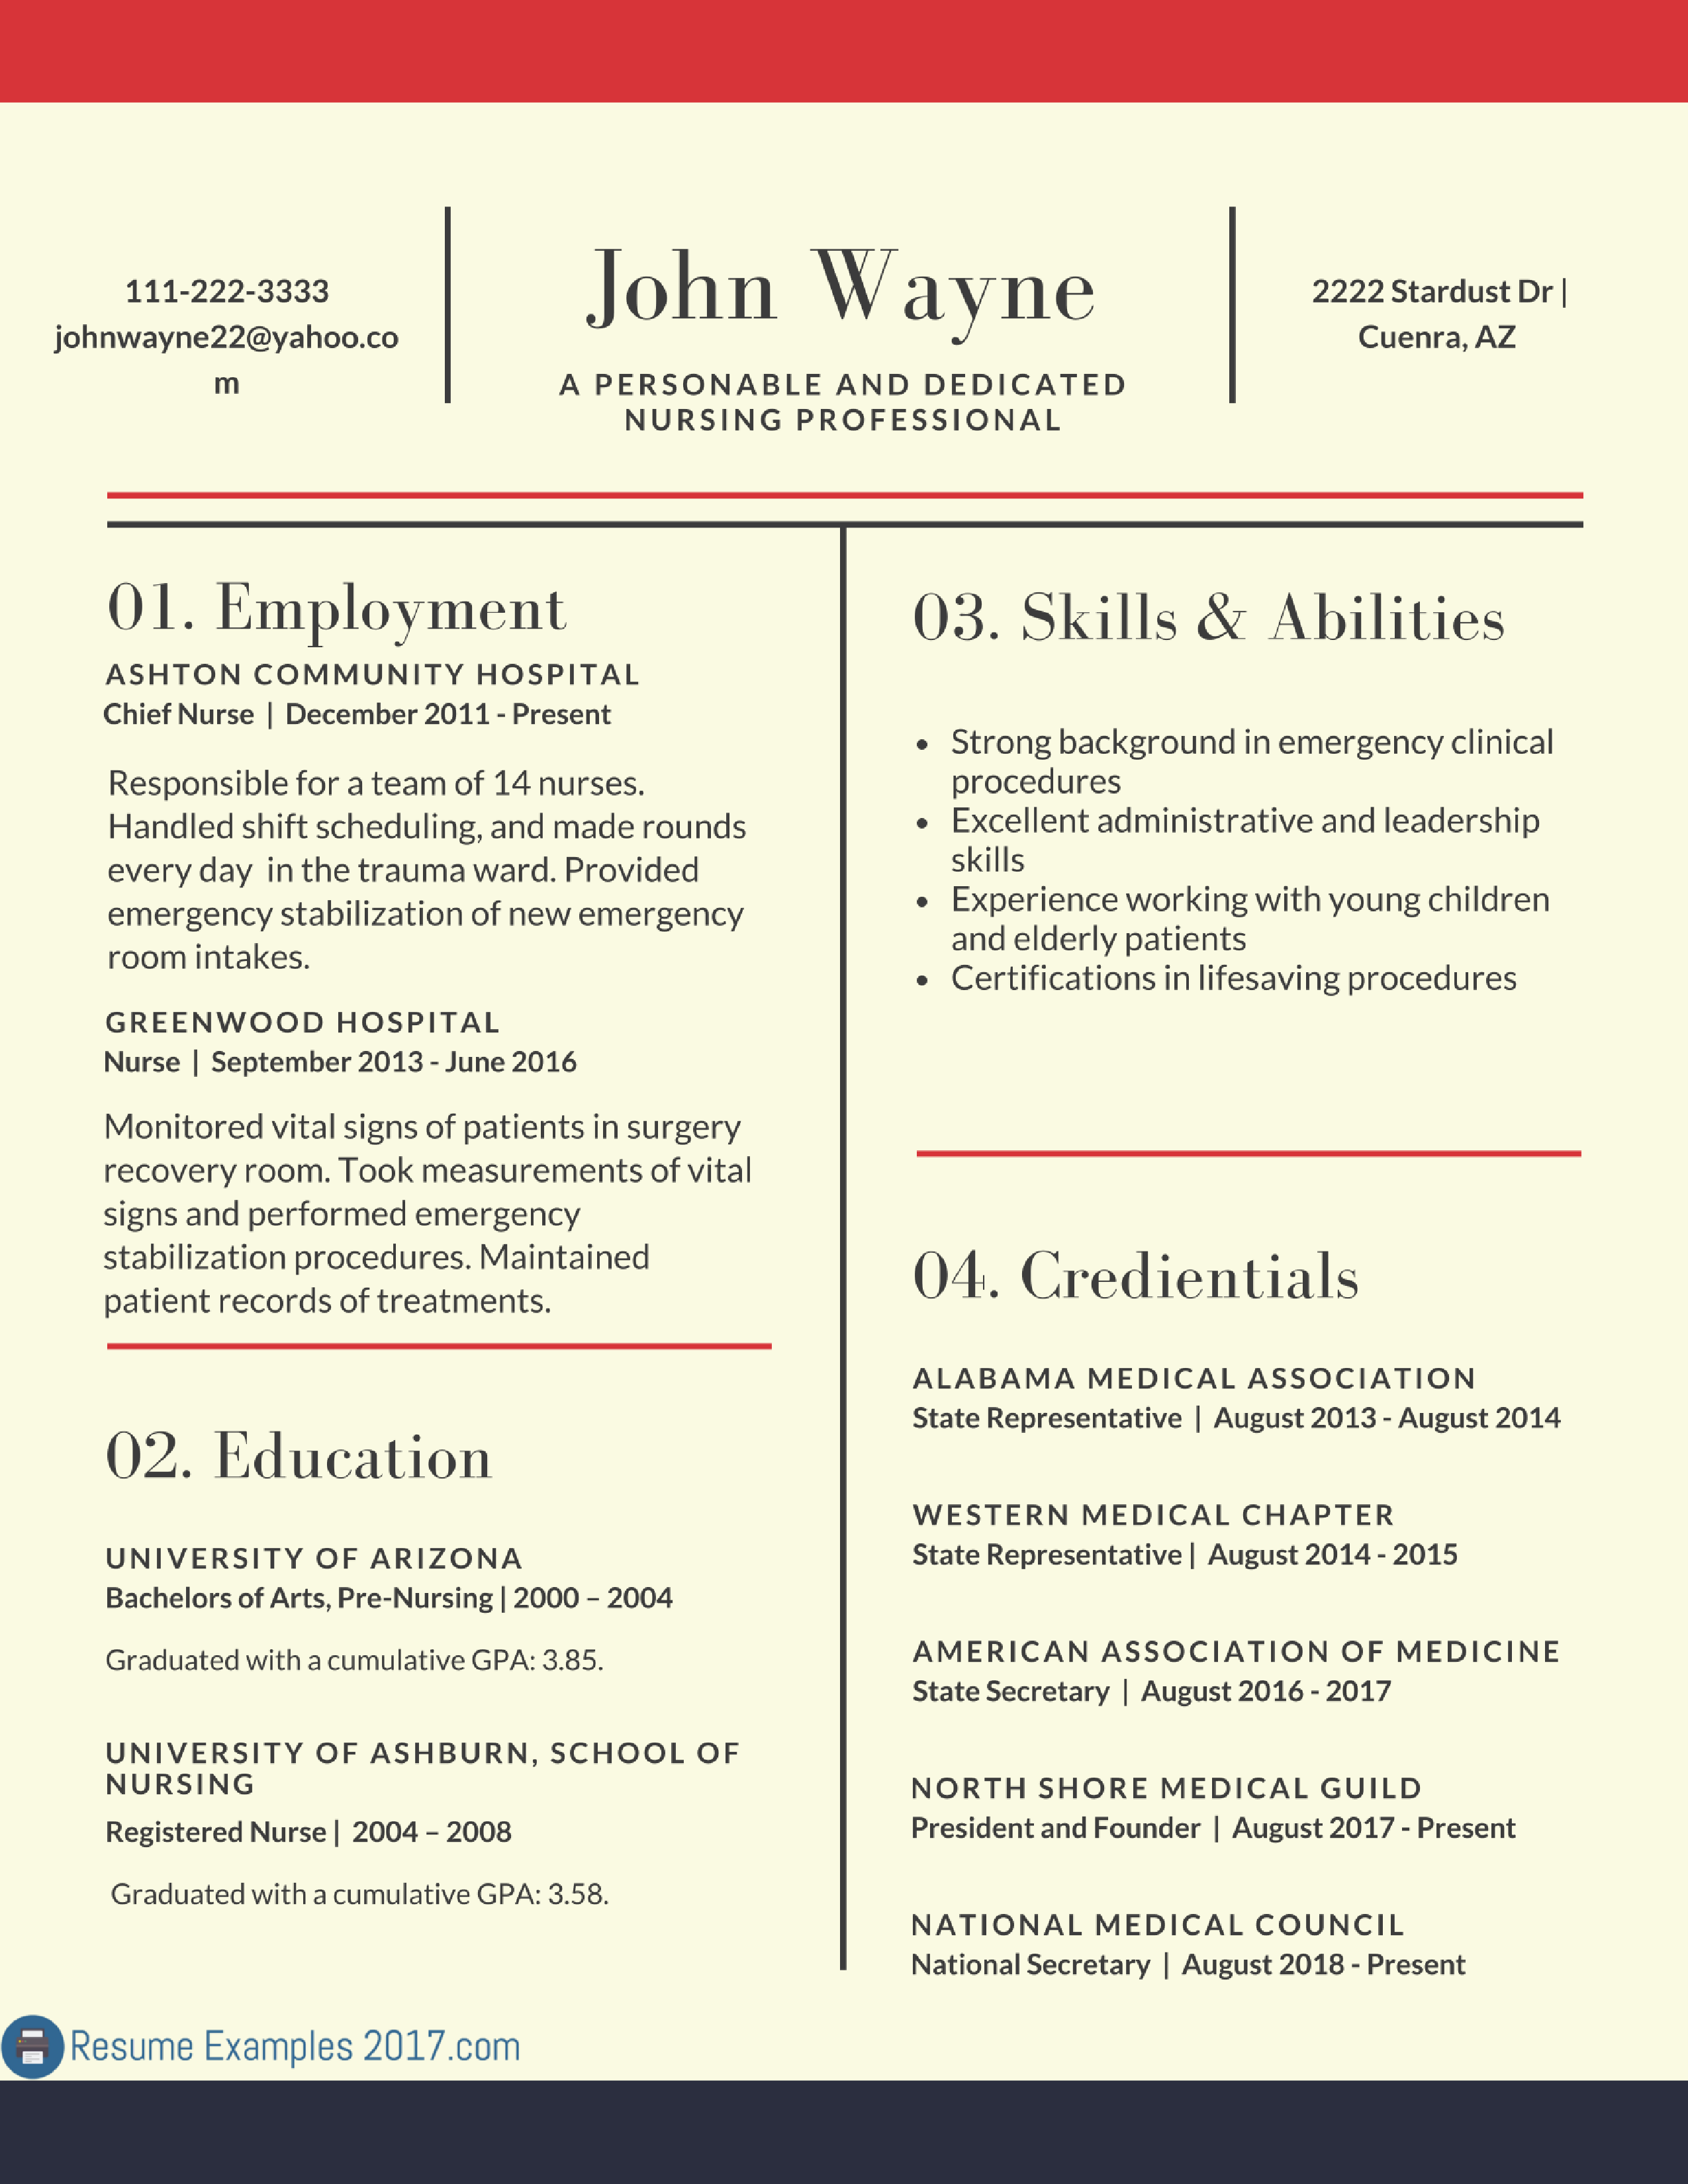 Download Examples Of Excellent Resumes 2017 throughout Examples Of Excellent Resumes 2017 in Workshhet